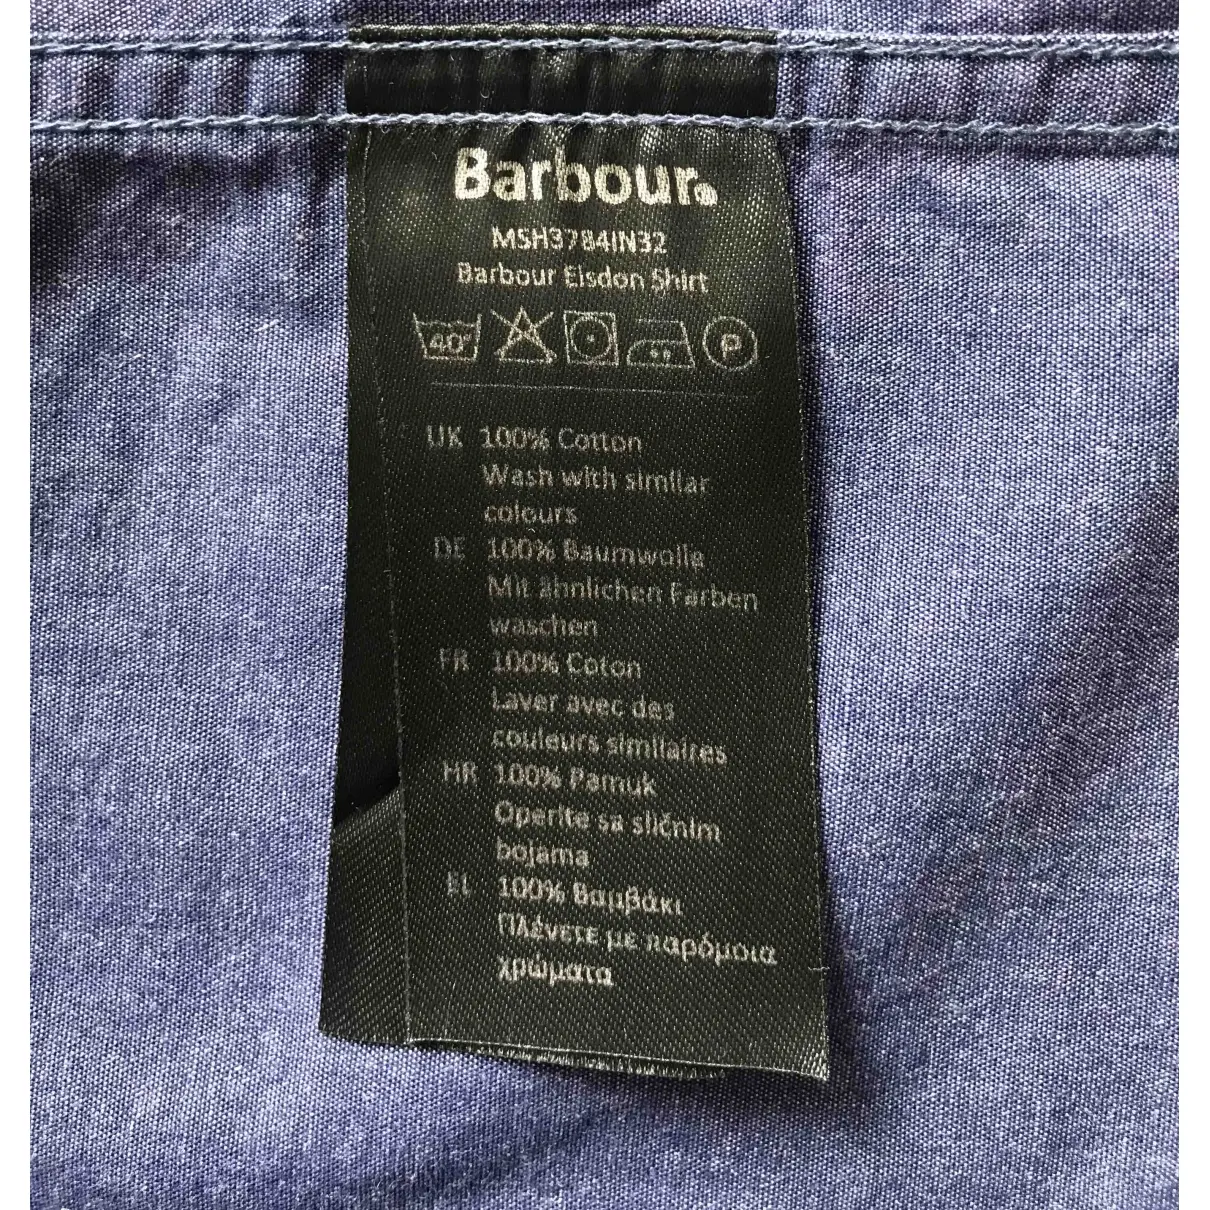 Barbour Shirt for sale